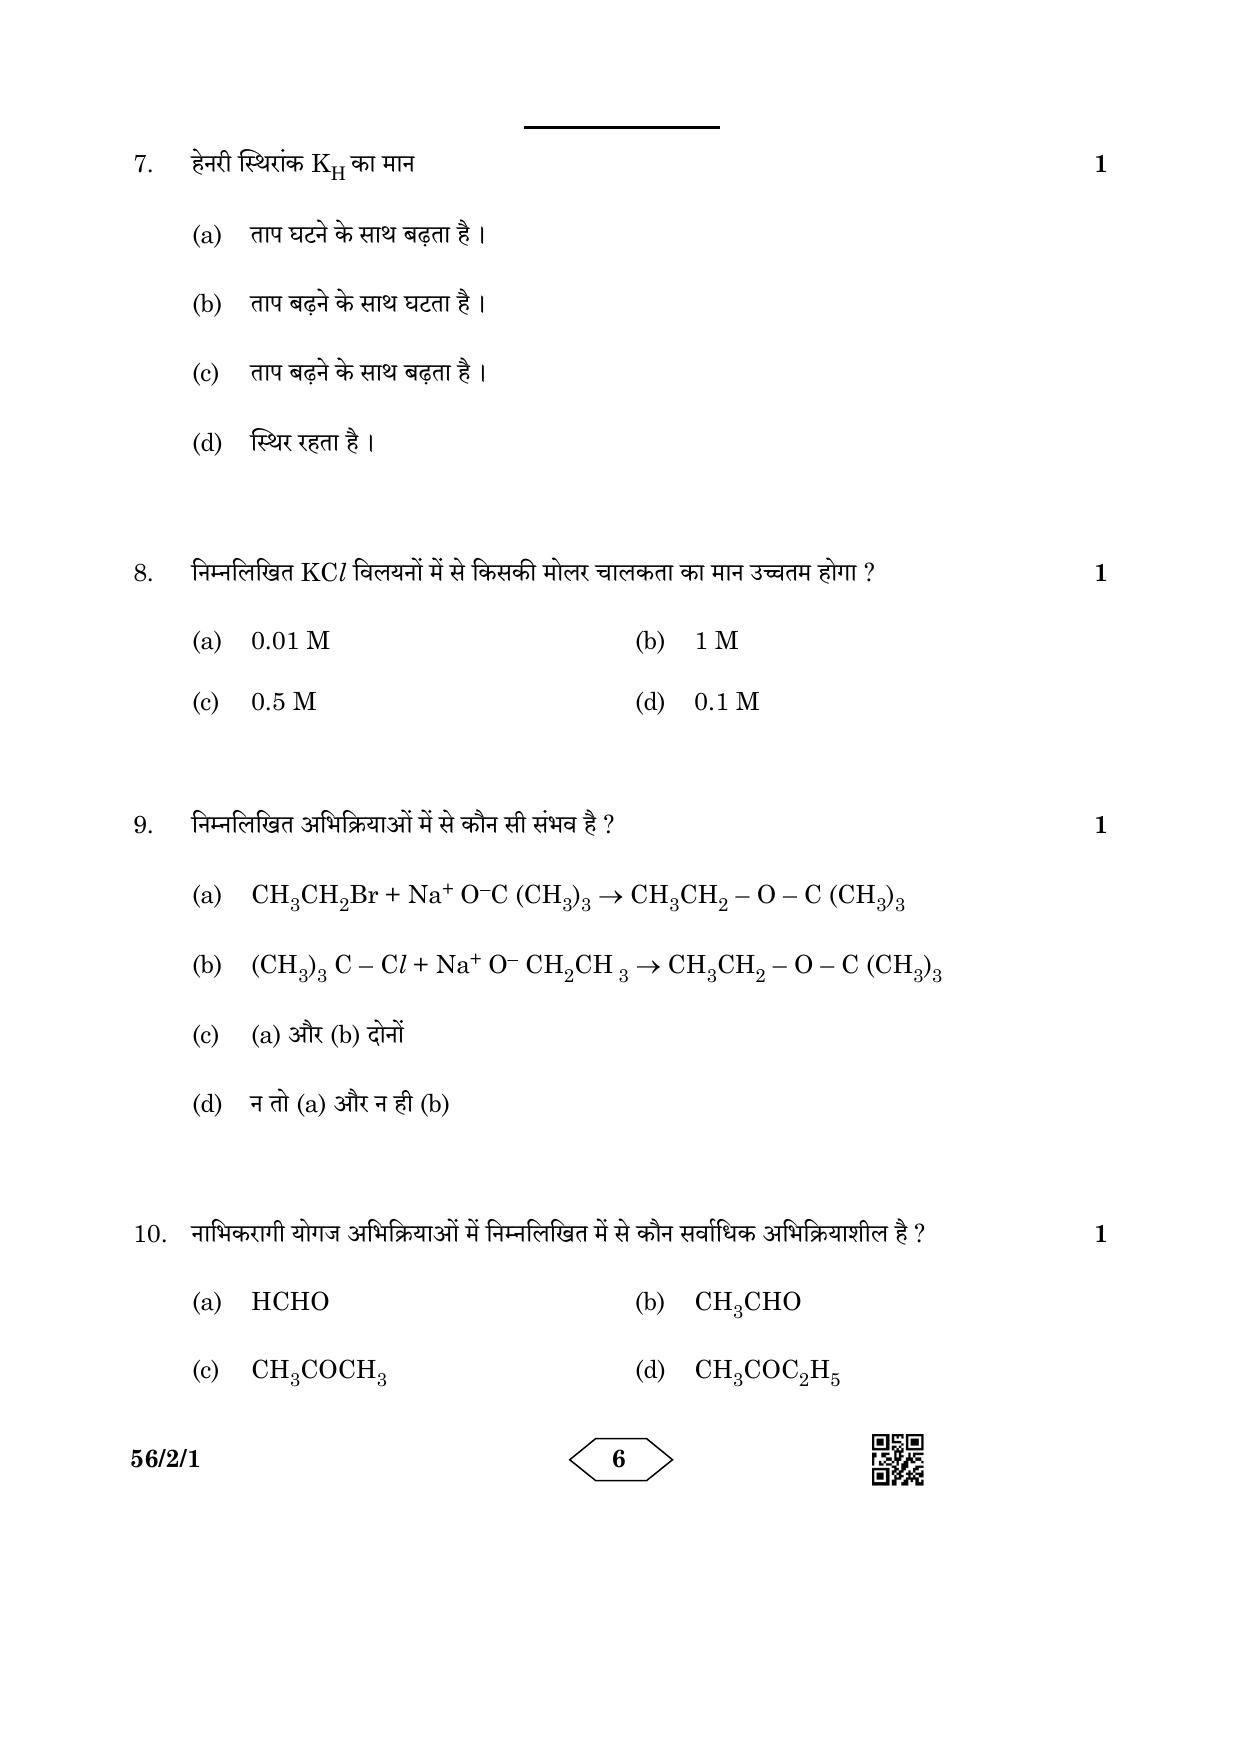 CBSE Class 12 56-2-1 Chemistry 2023 Question Paper - Page 6